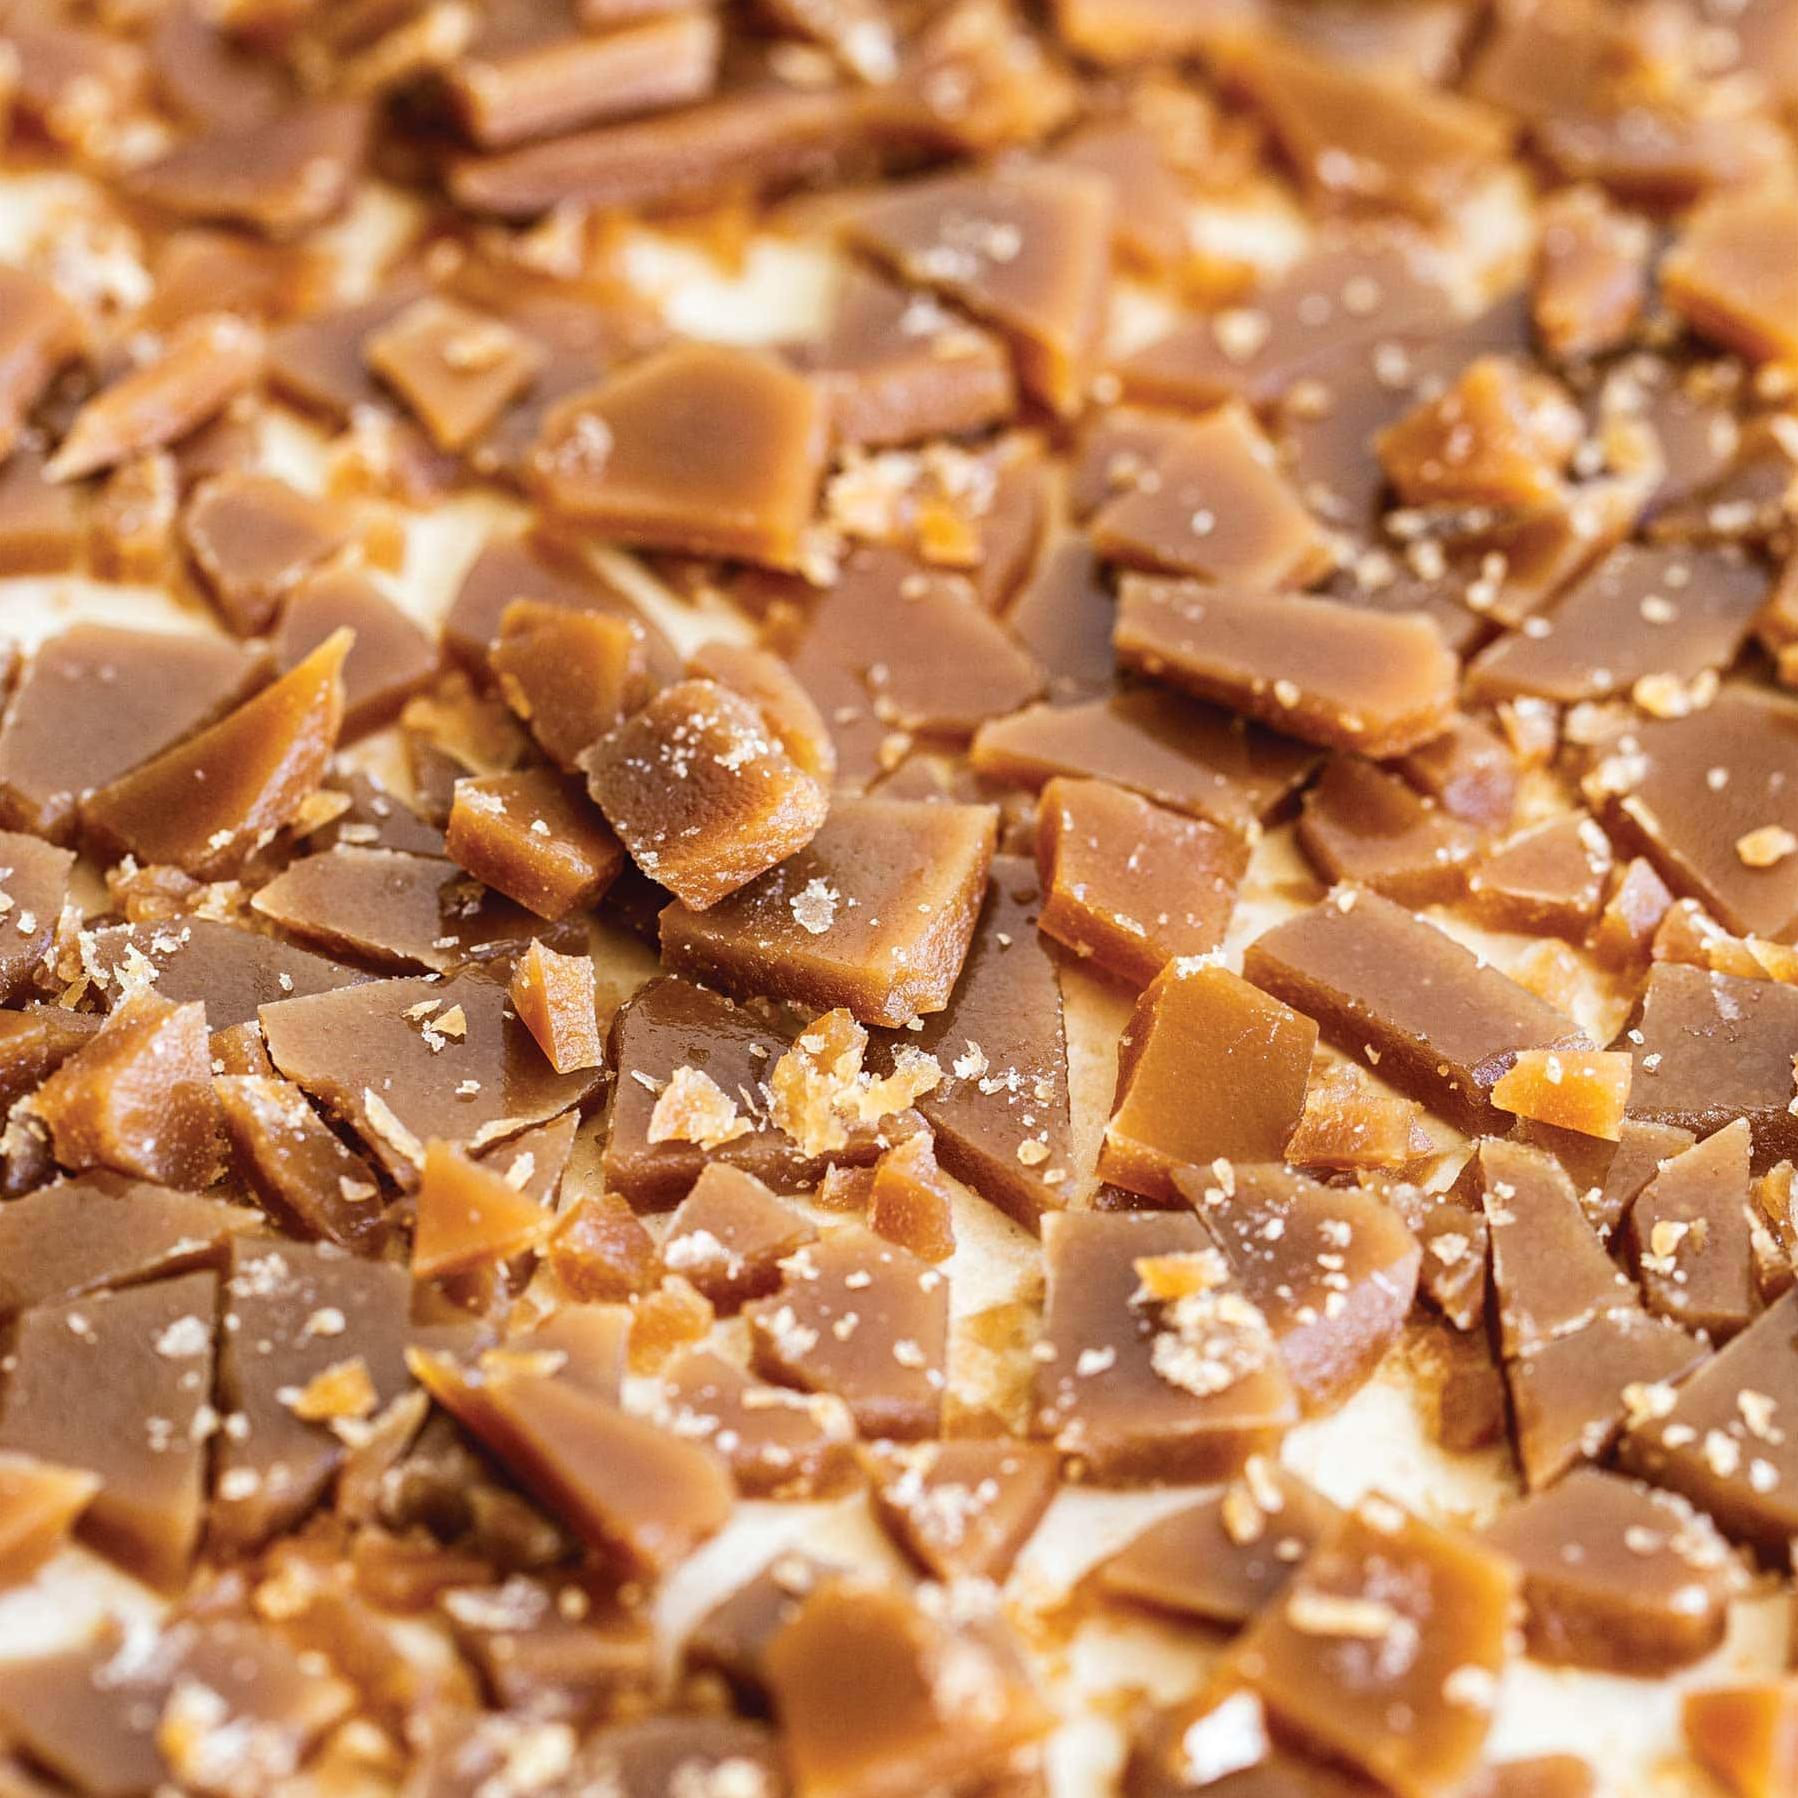  Say hello to your new favorite toffee recipe!